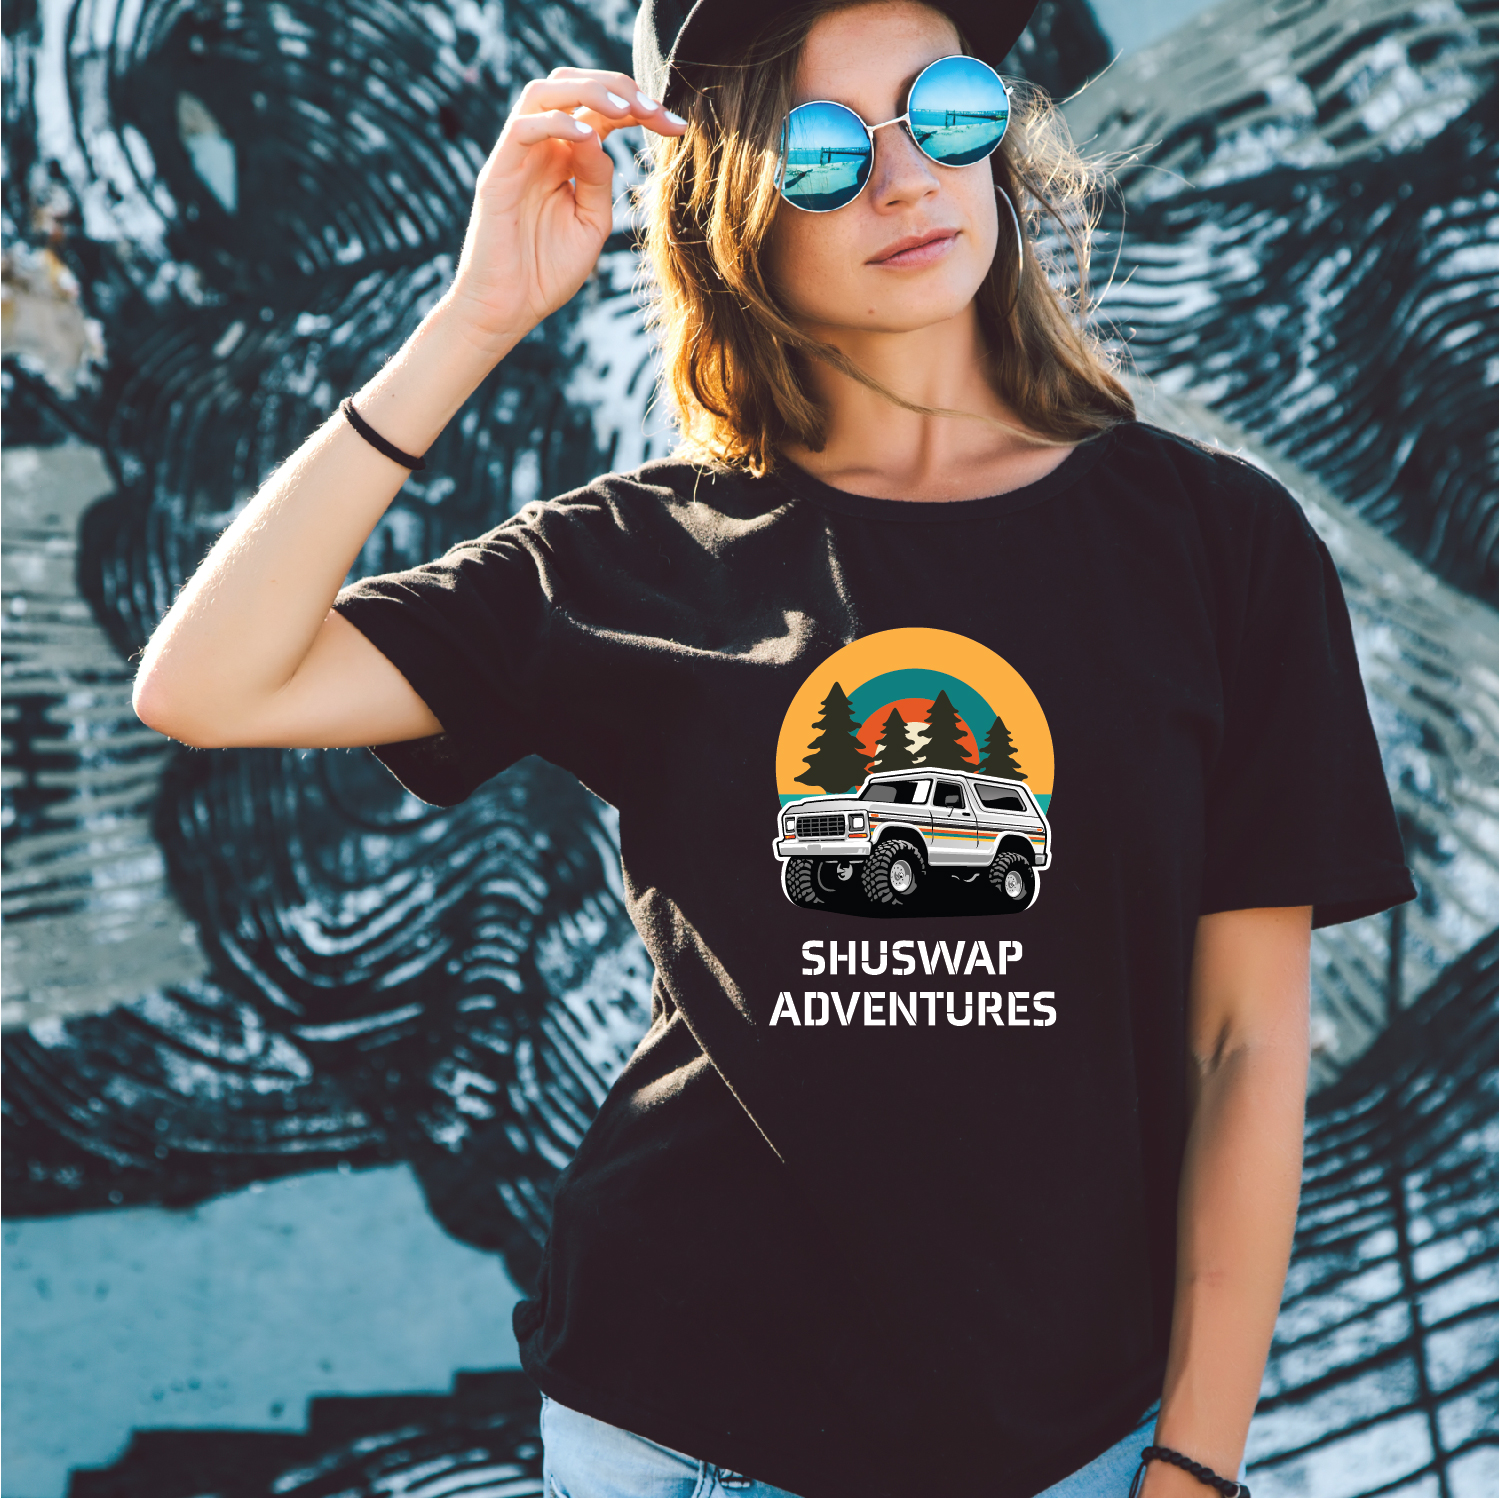 SHUSWAP ADVENTURES TSHIRT by bl3nd design graphic design agency in abbotsford british columbia canada